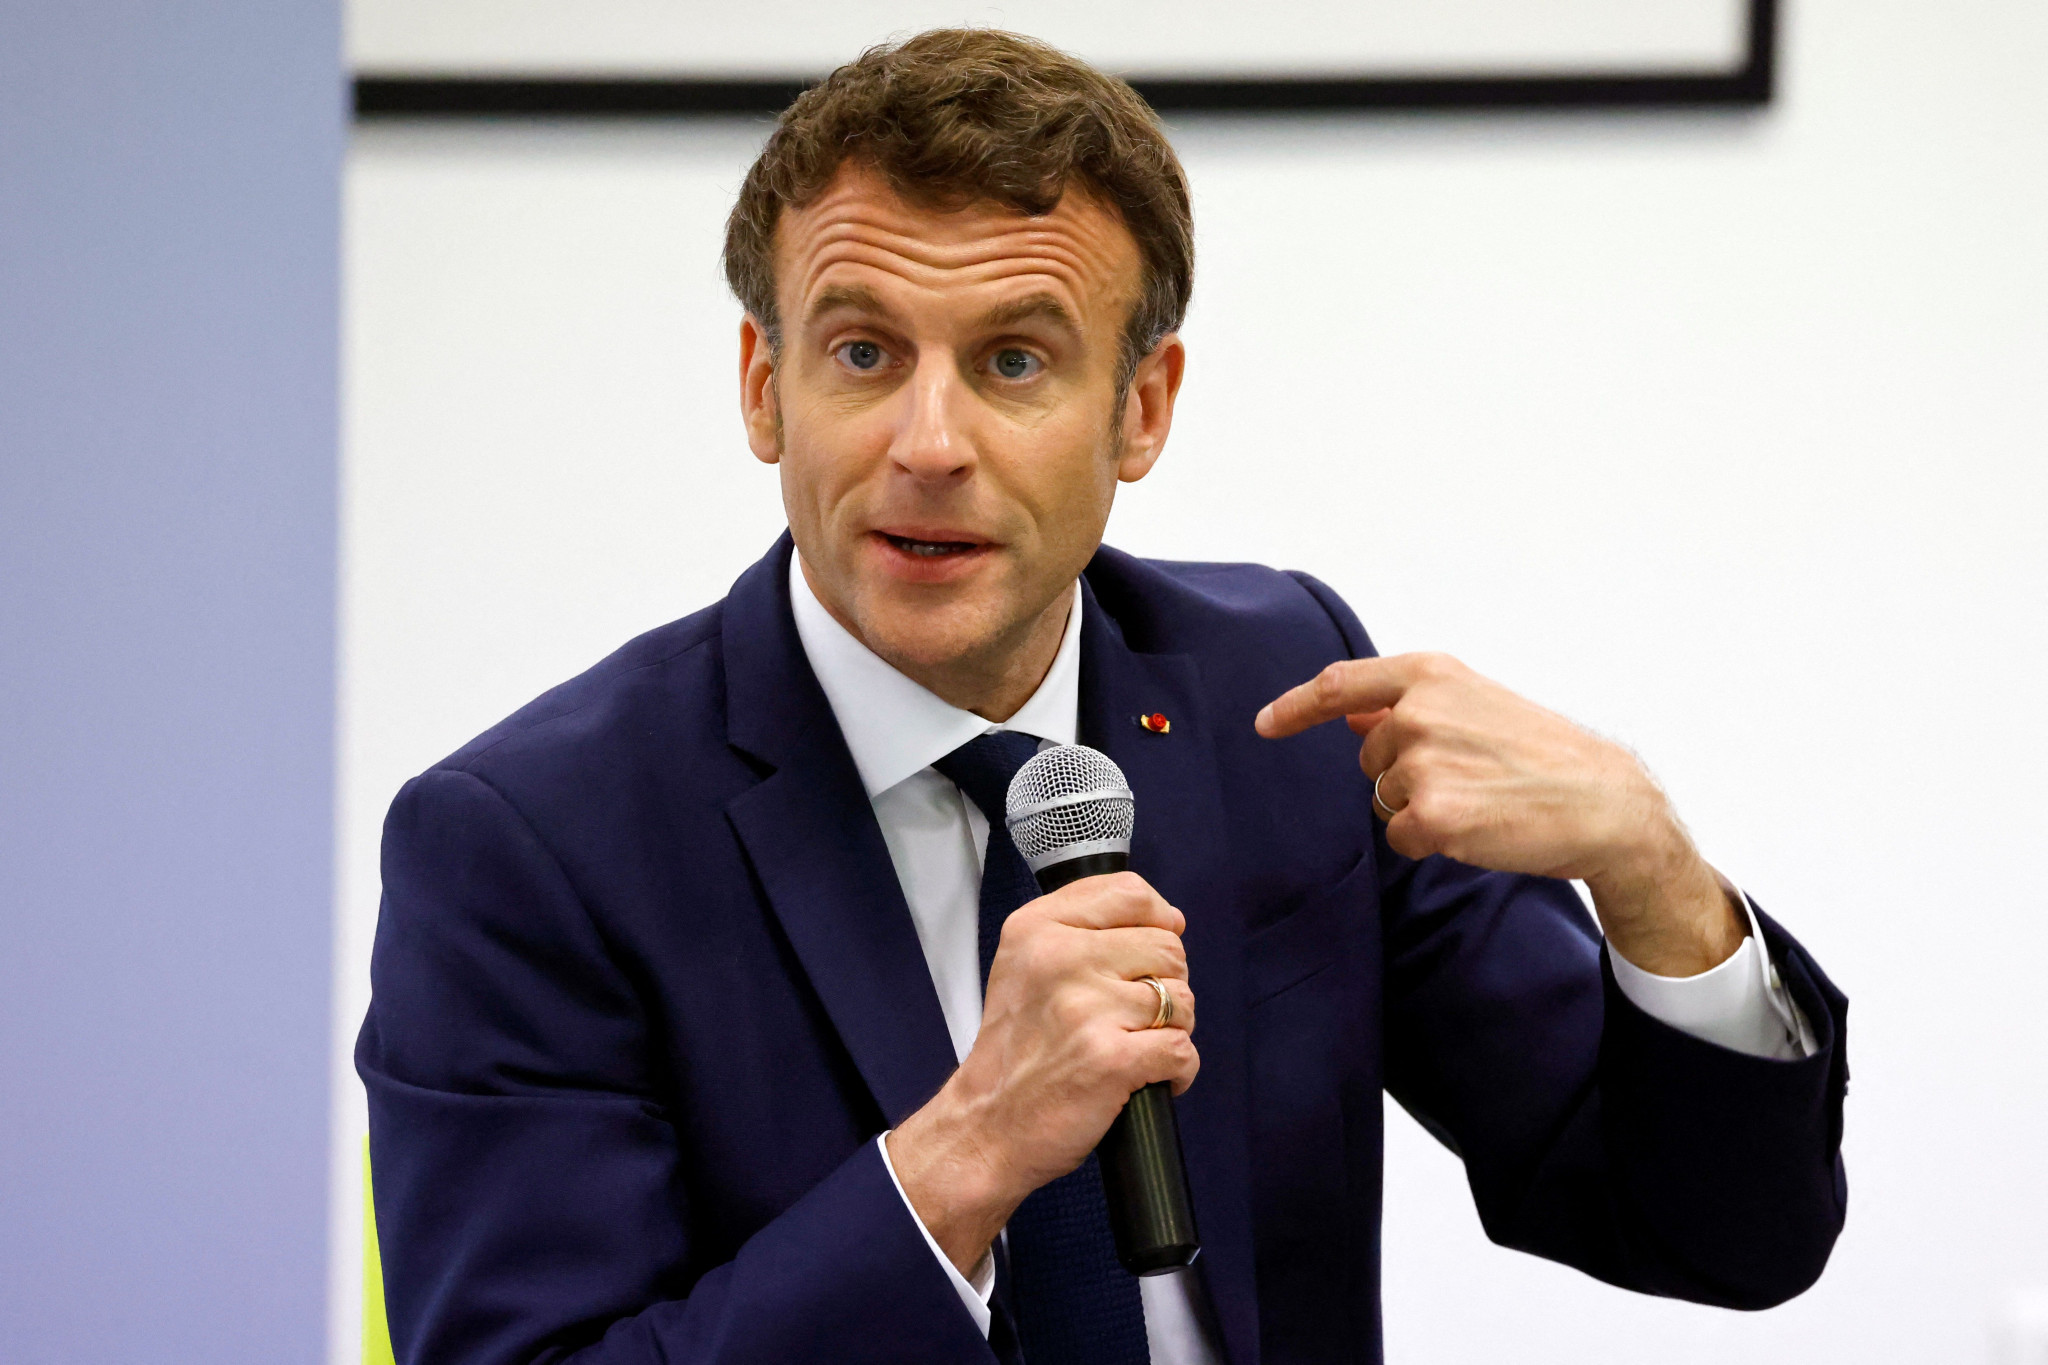 Macron states "sport should not be politicised" prior to FIFA World Cup